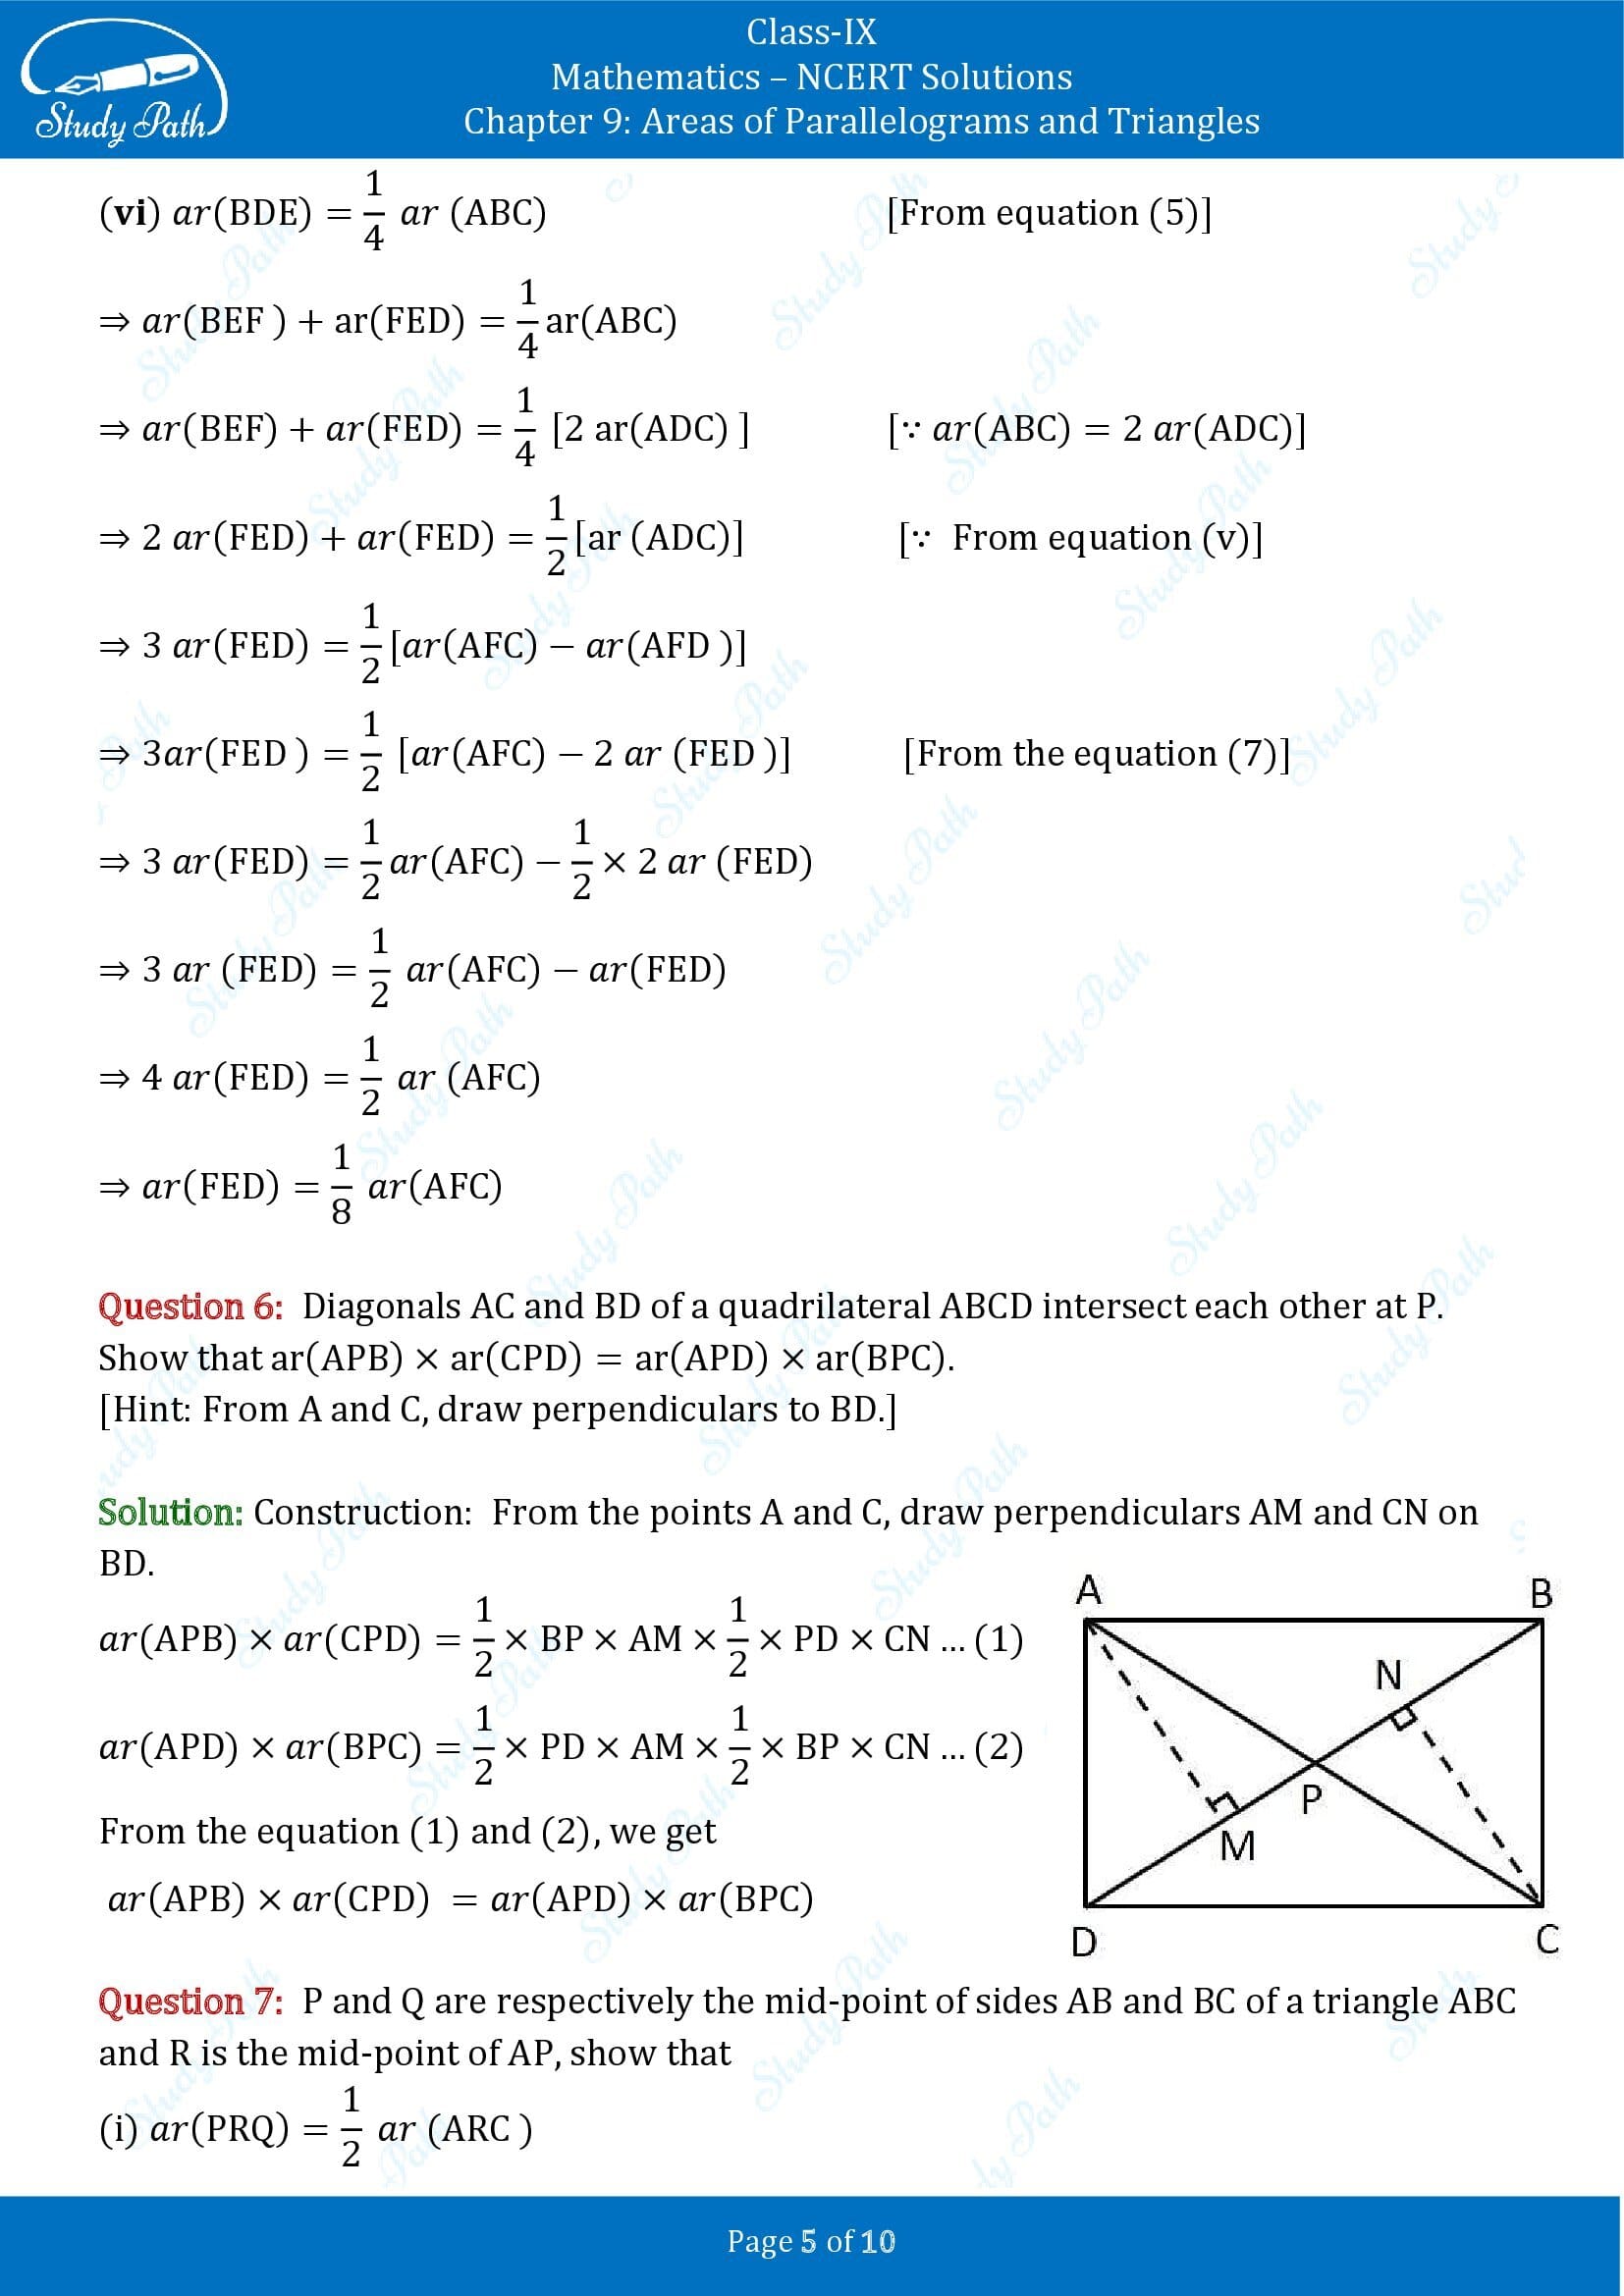 NCERT Solutions for Class 9 Maths Chapter 9 Areas of Parallelograms and Triangles Exercise 9.4 00005